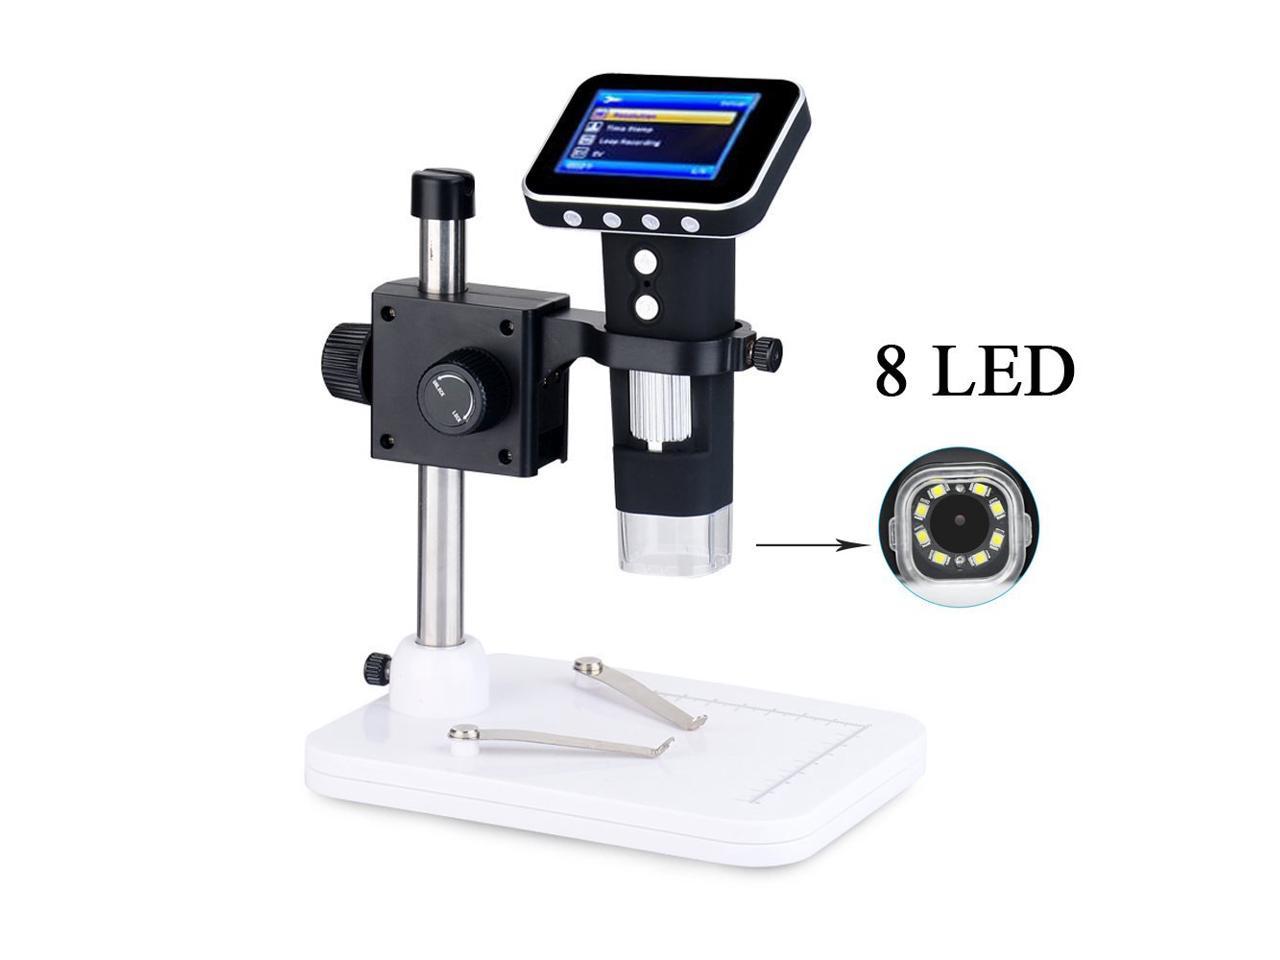 Plugable USB 2.0 Digital Microscope with Flexible Arm Stand Refurbished 